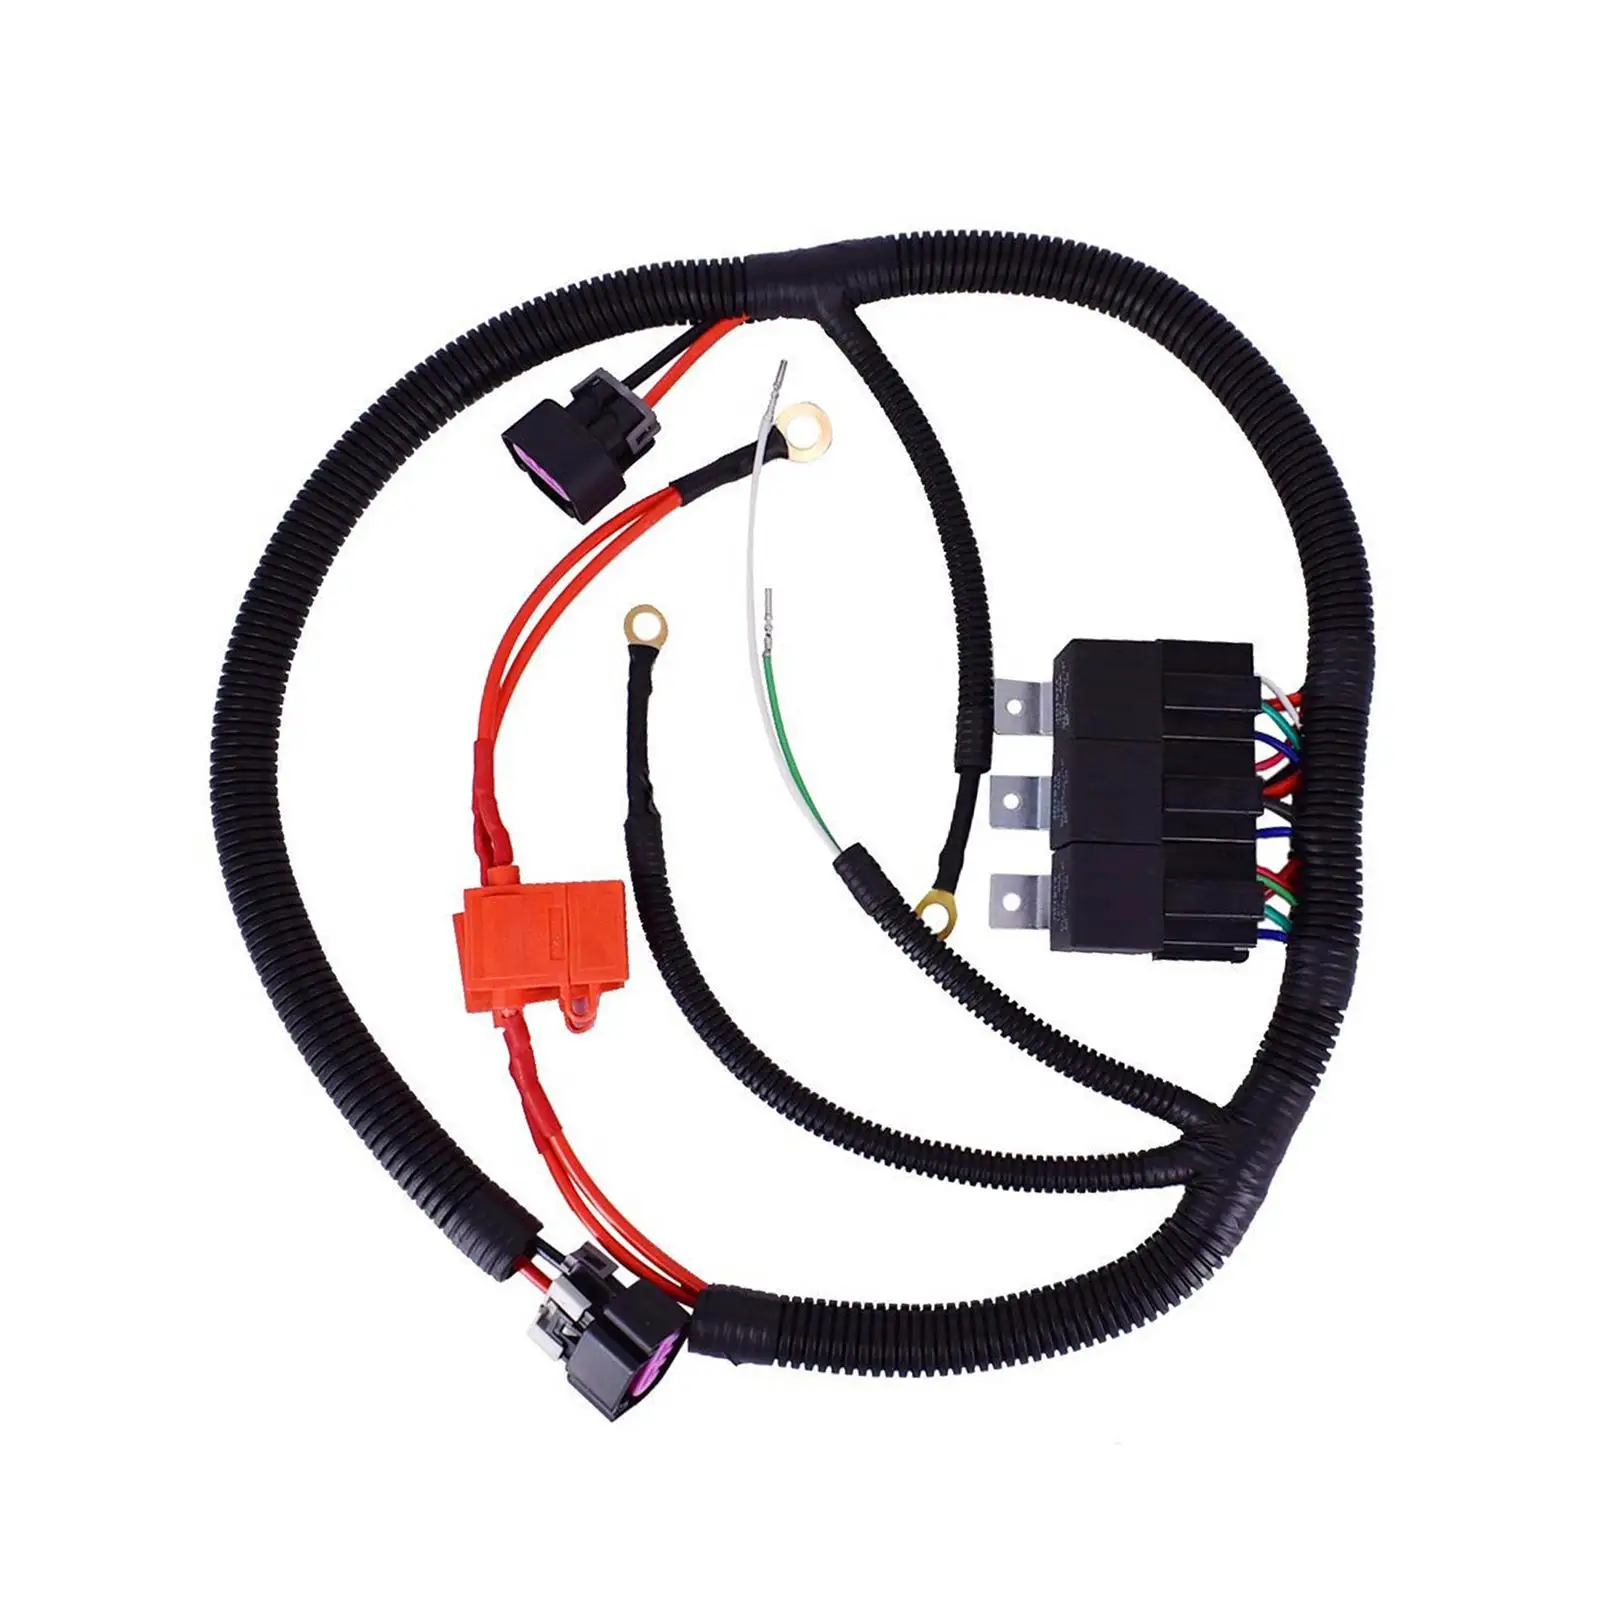 Dual Electric Fan Upgrade Wiring Harness Kit 7L5533A226T Durable Automotive